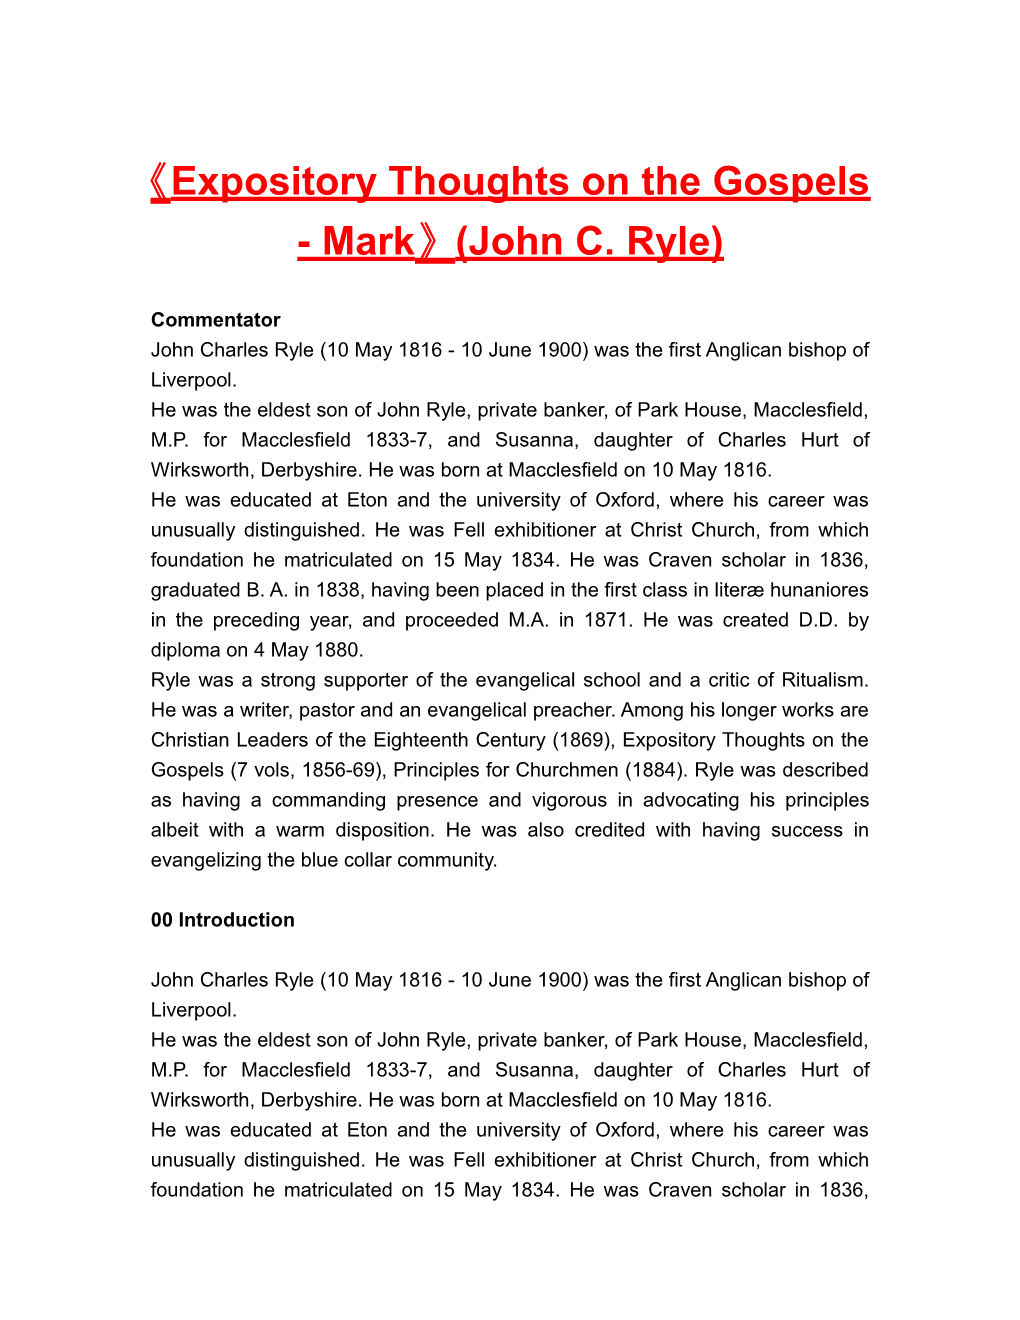 Expository Thoughts on the Gospels - Mark (John C. Ryle)